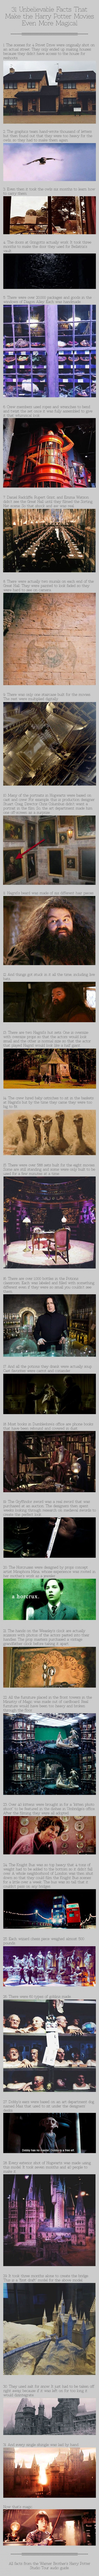 31 Unbelieveable Facts That Make The Harry Potter Movies Even More Magical